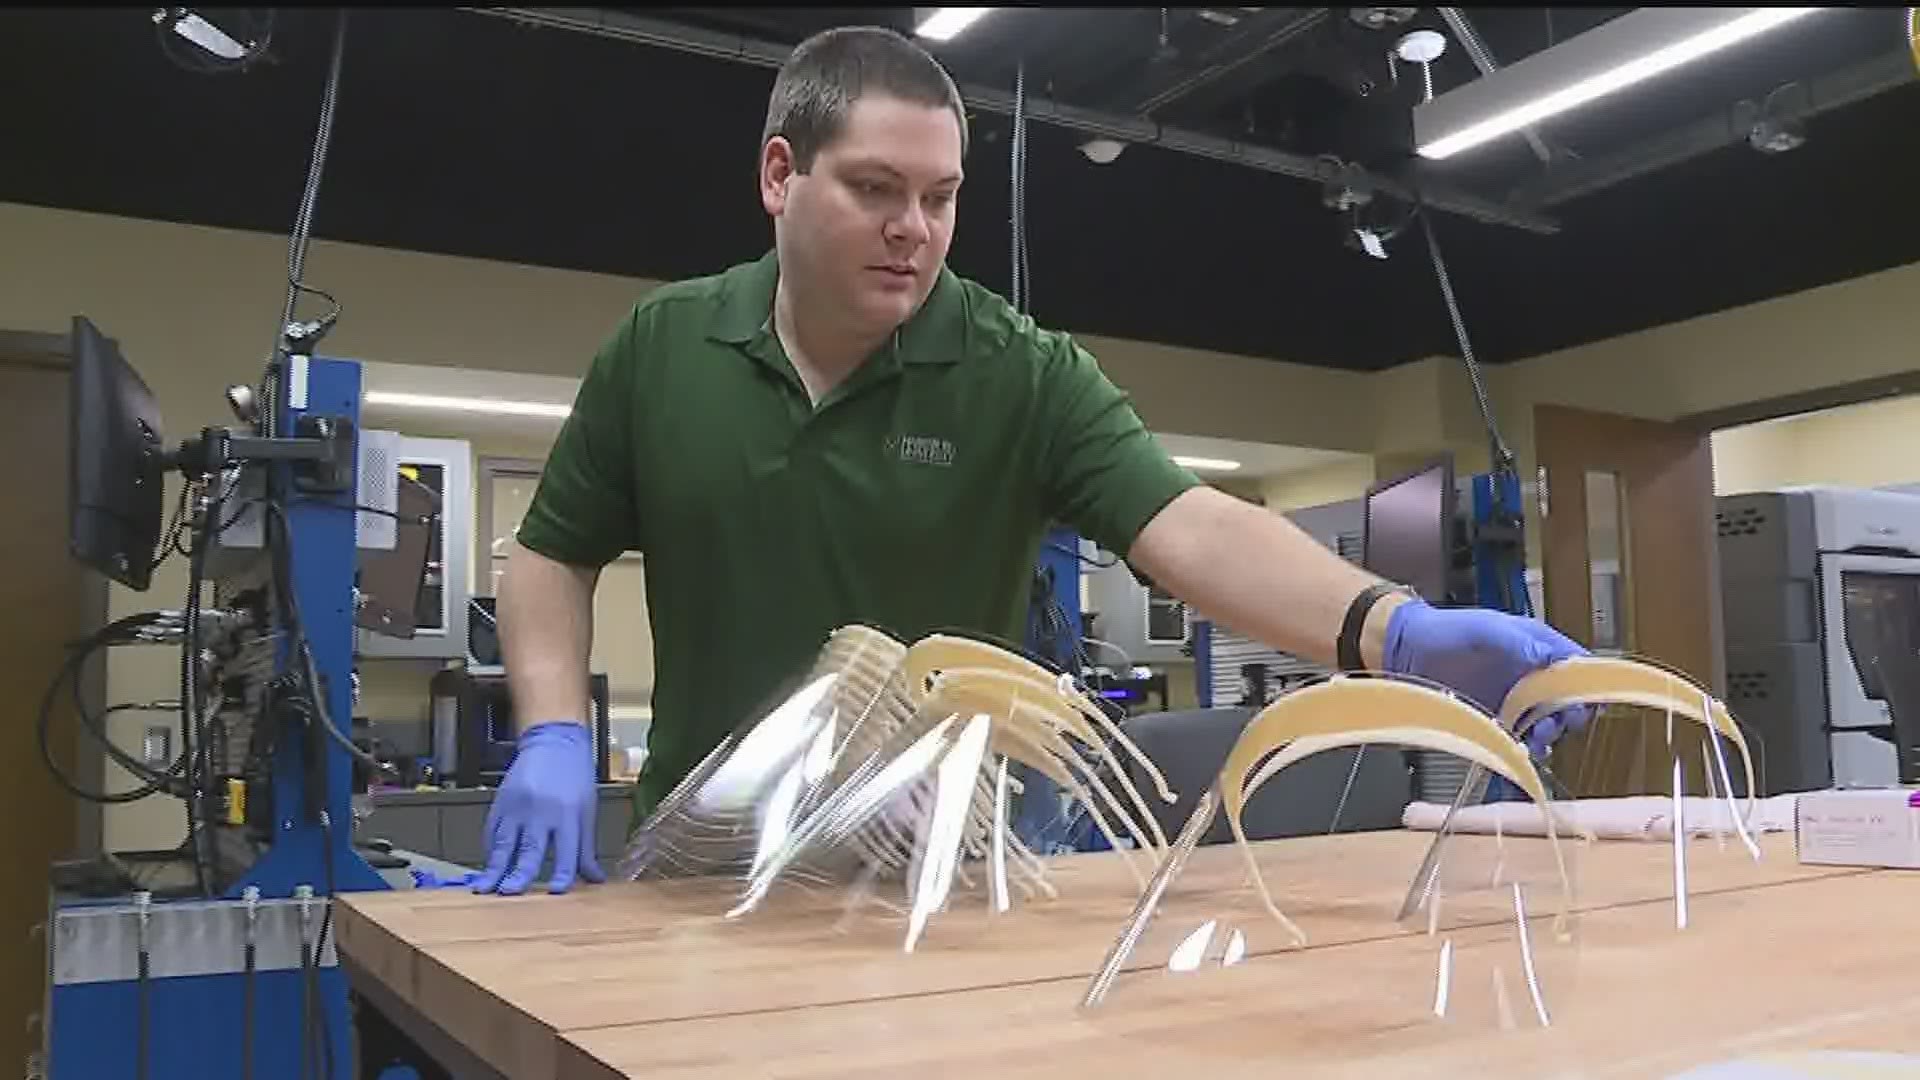 HU is manufacturing face shields to protect workers at nursing homes.